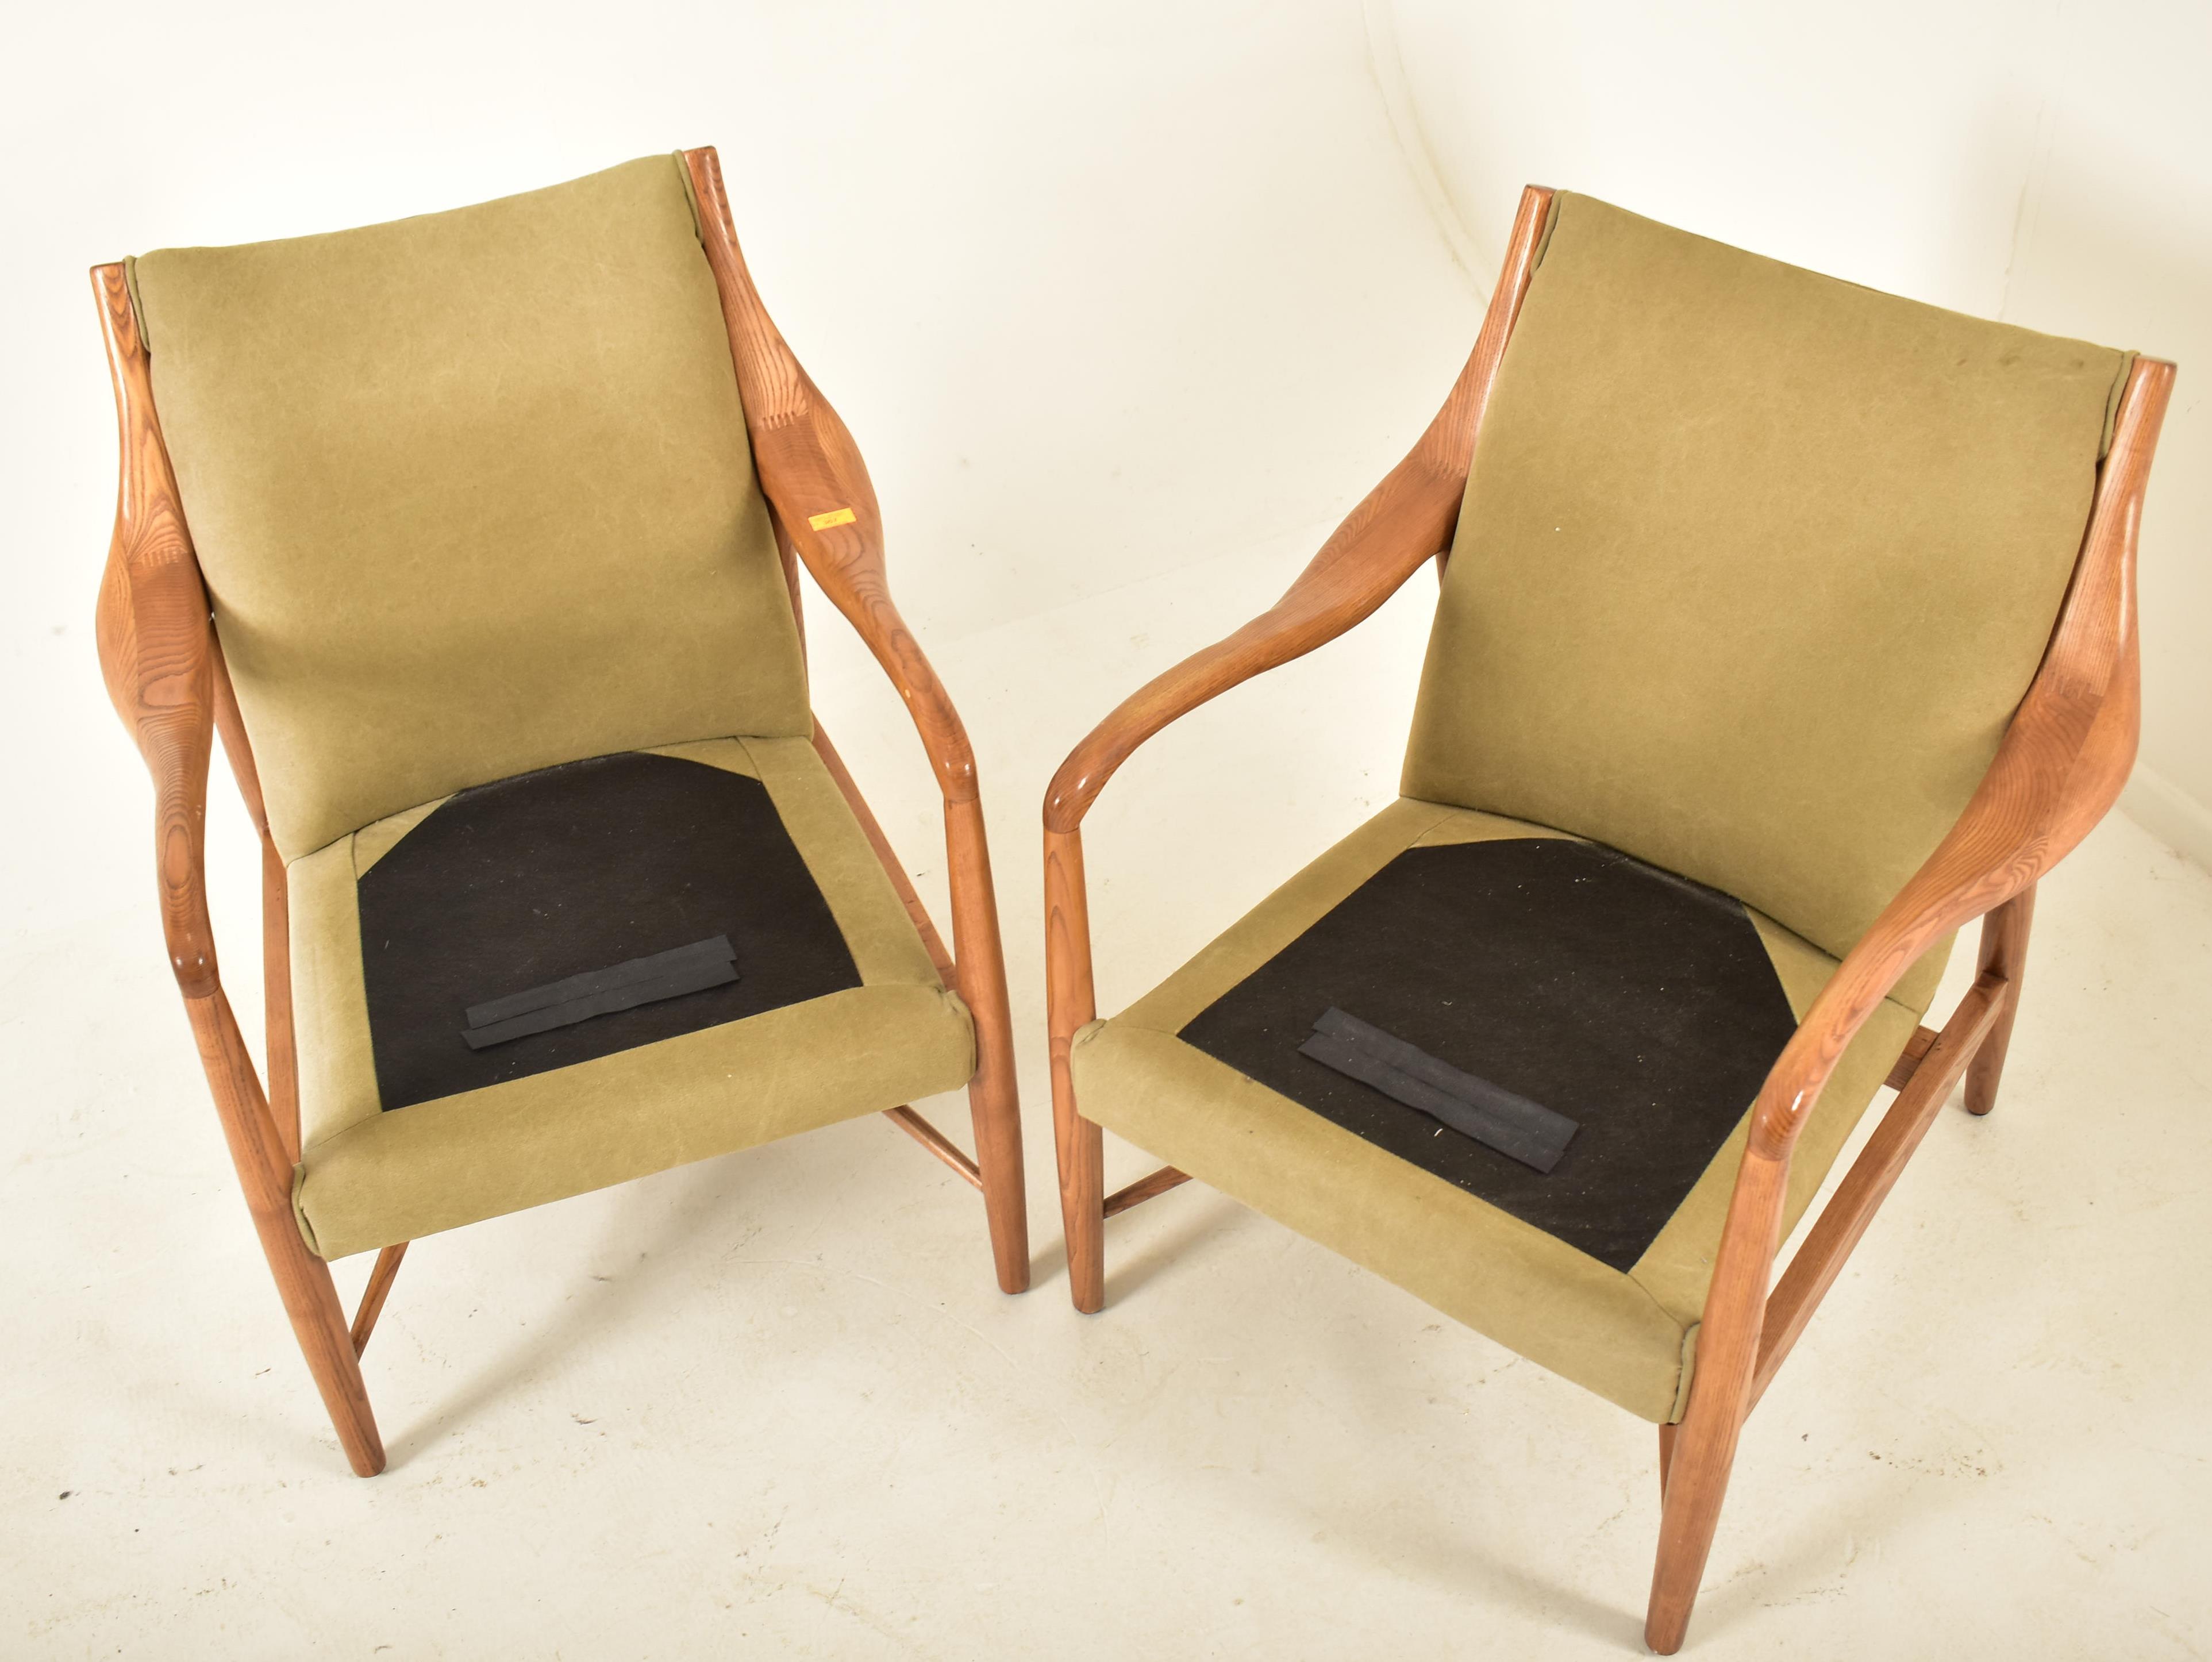 PAIR OF CONTEMPORARY RETRO STYLE OAK FRAMED ARMCHAIRS - Image 2 of 4